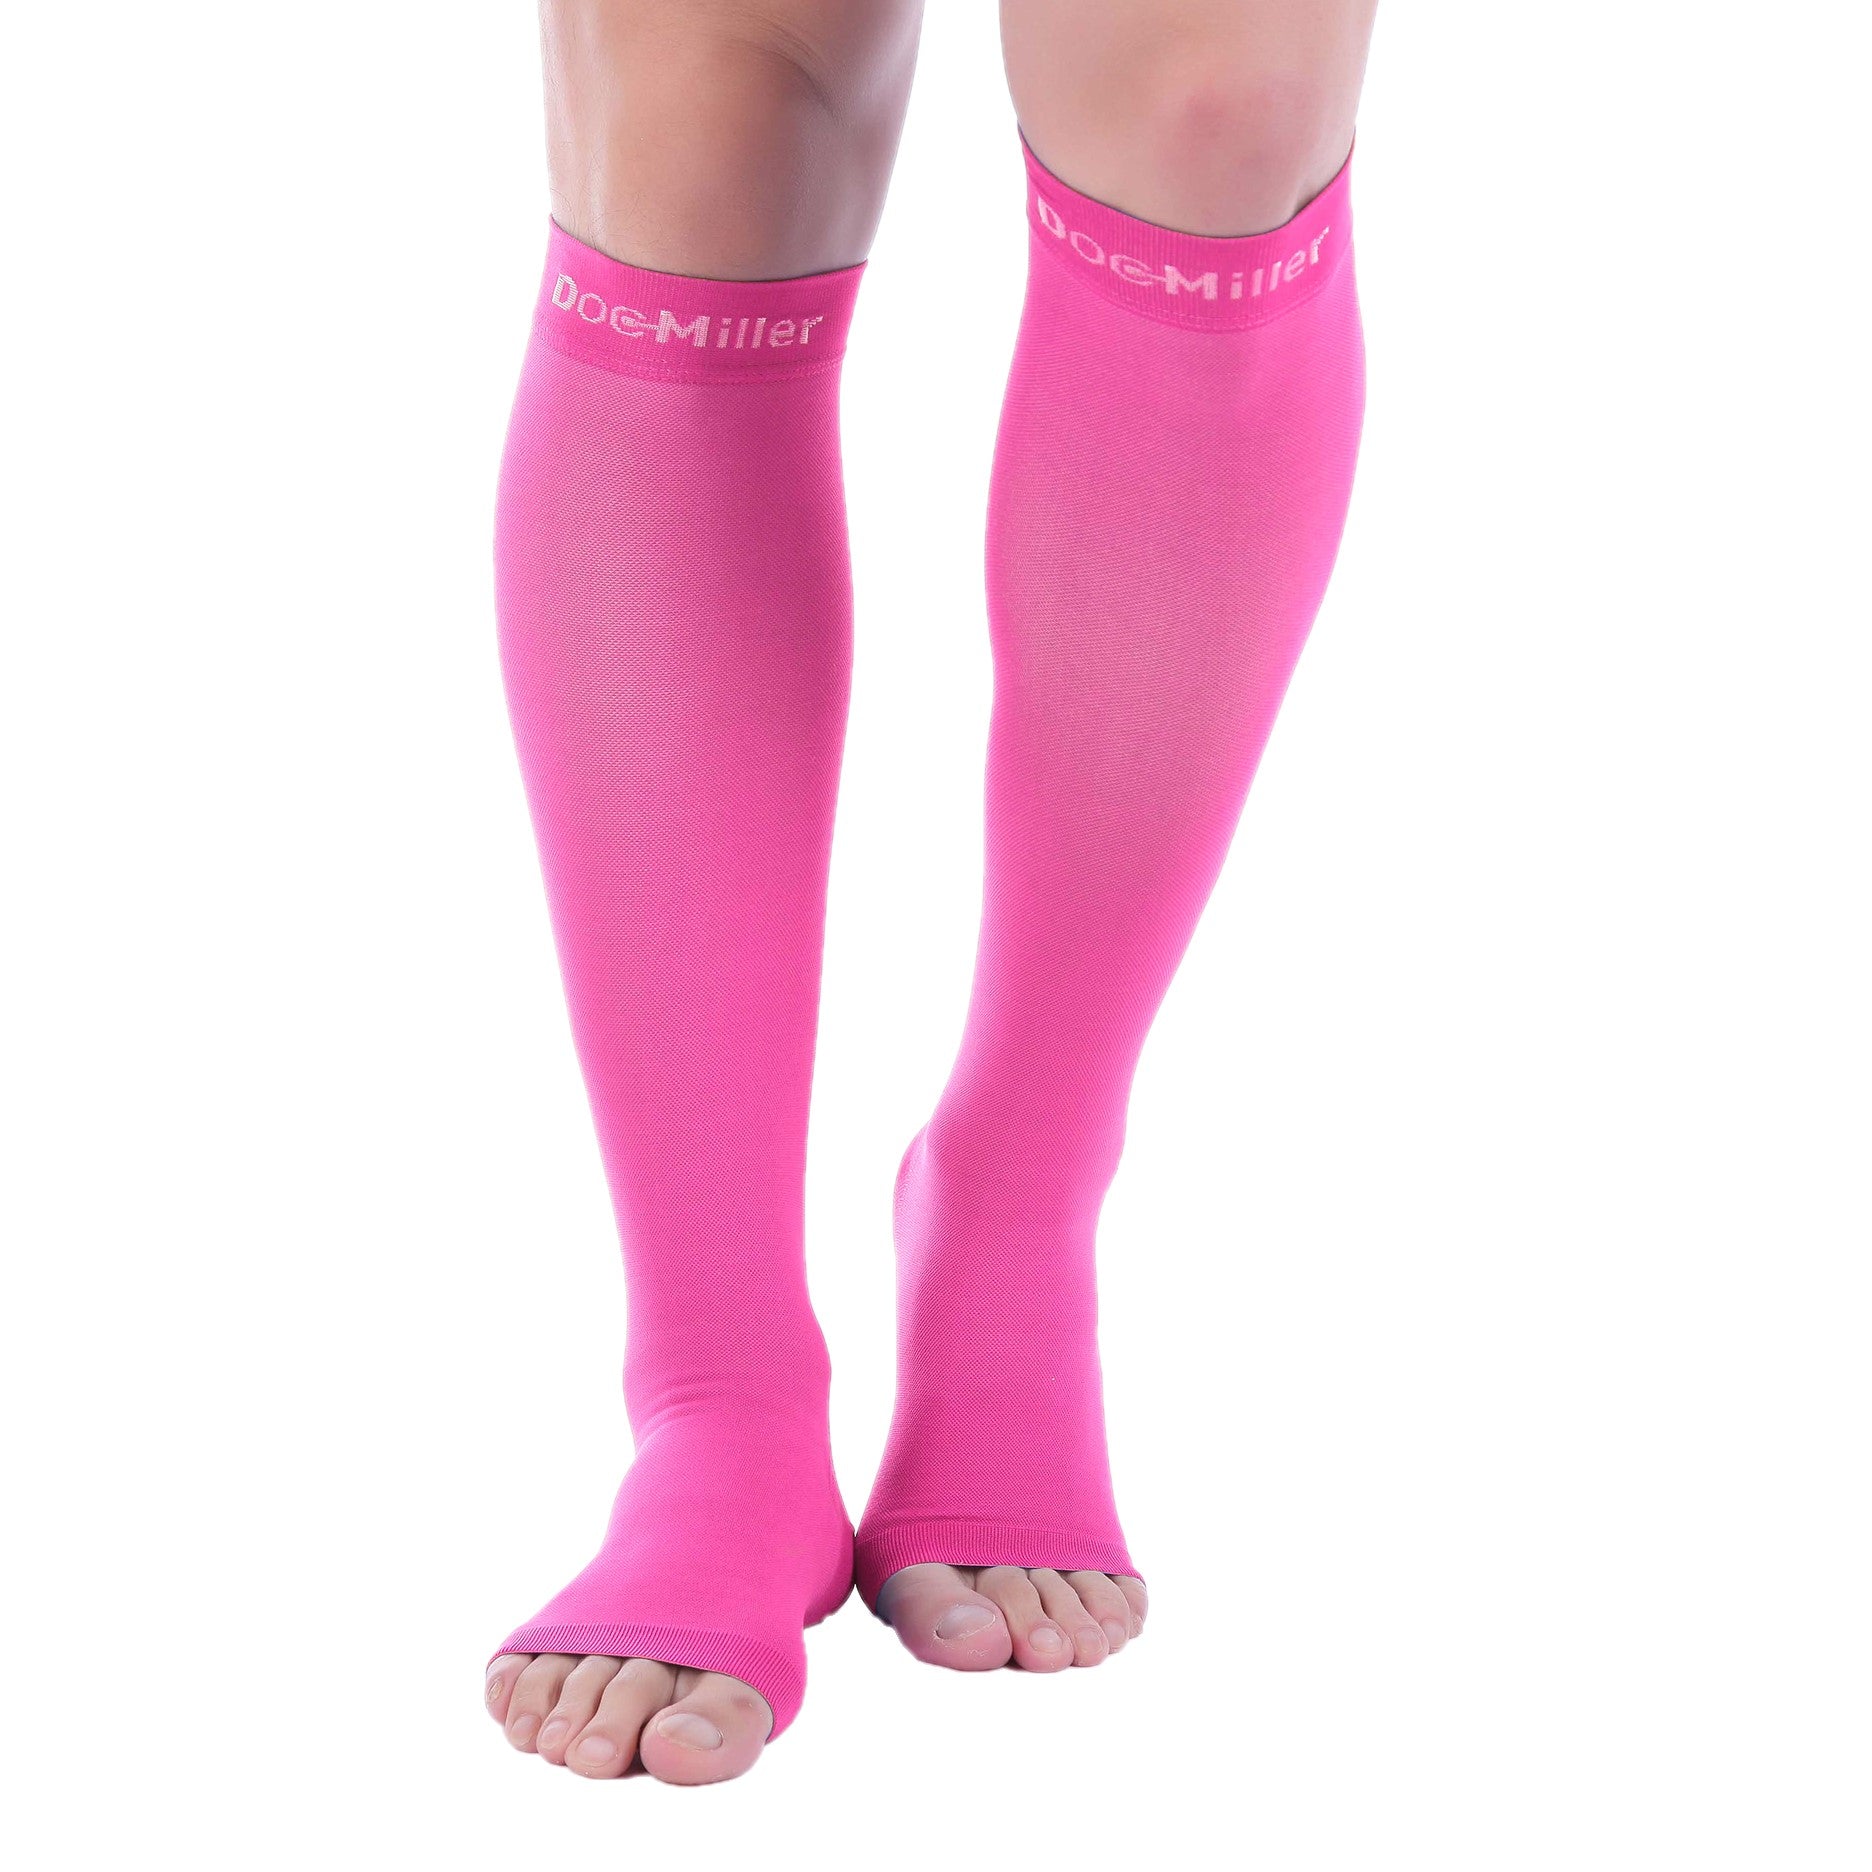 Open Toe Compression Socks 20-30 mmHg PINK by Doc Miller